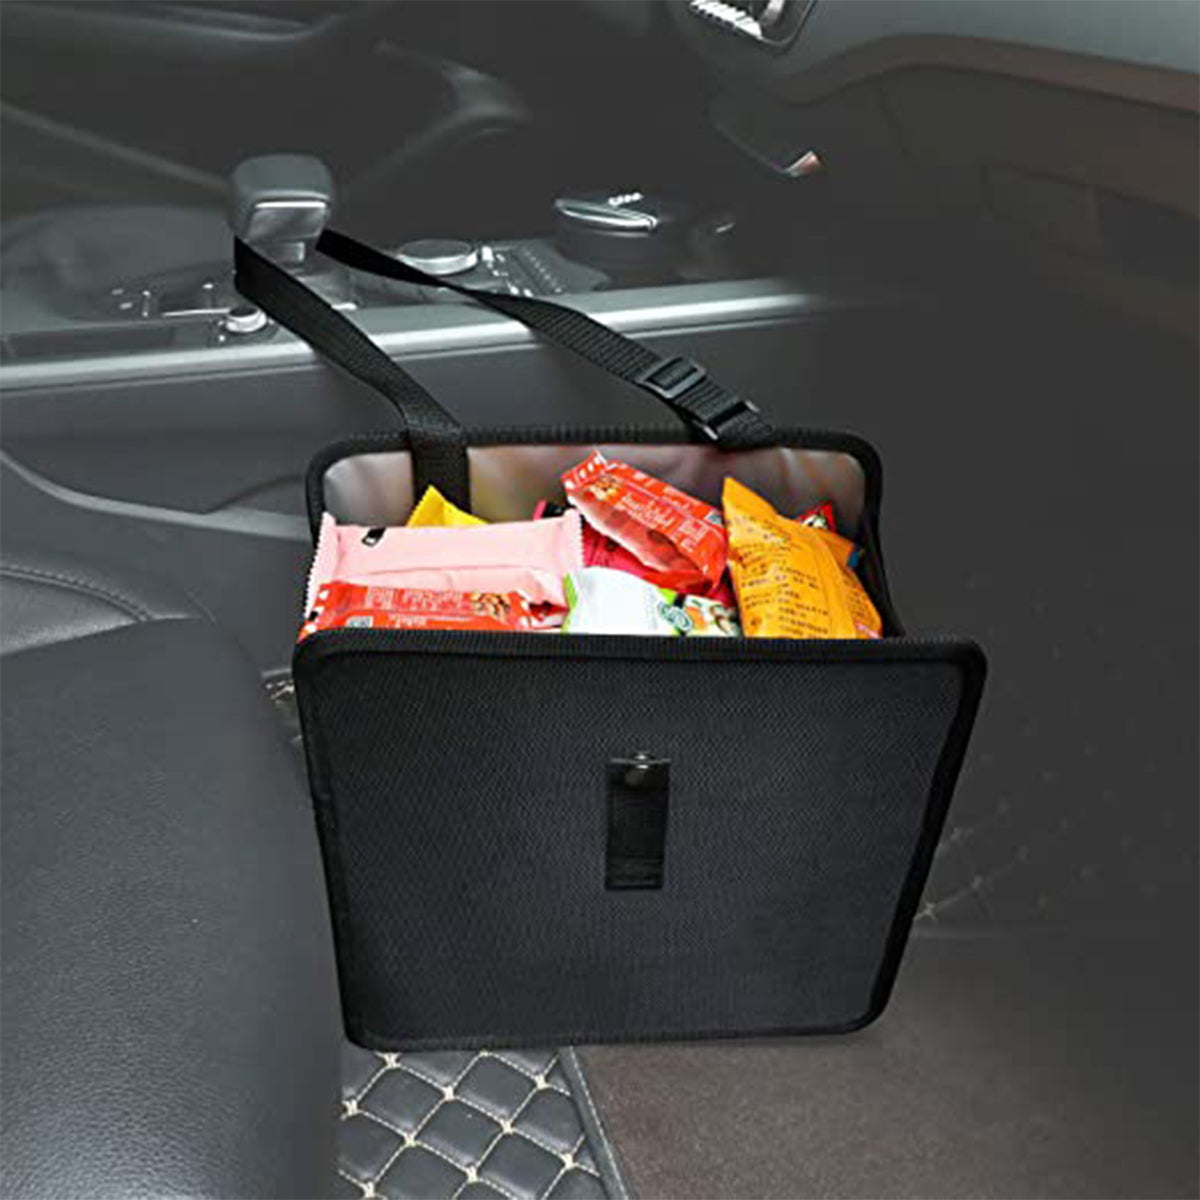 Car Trash Can, Custom fit for Waterproof Foldable Auto Garbage Bag, Leak-Proof Car Organizer and Storage Bag, Car Garbage Can Hanging